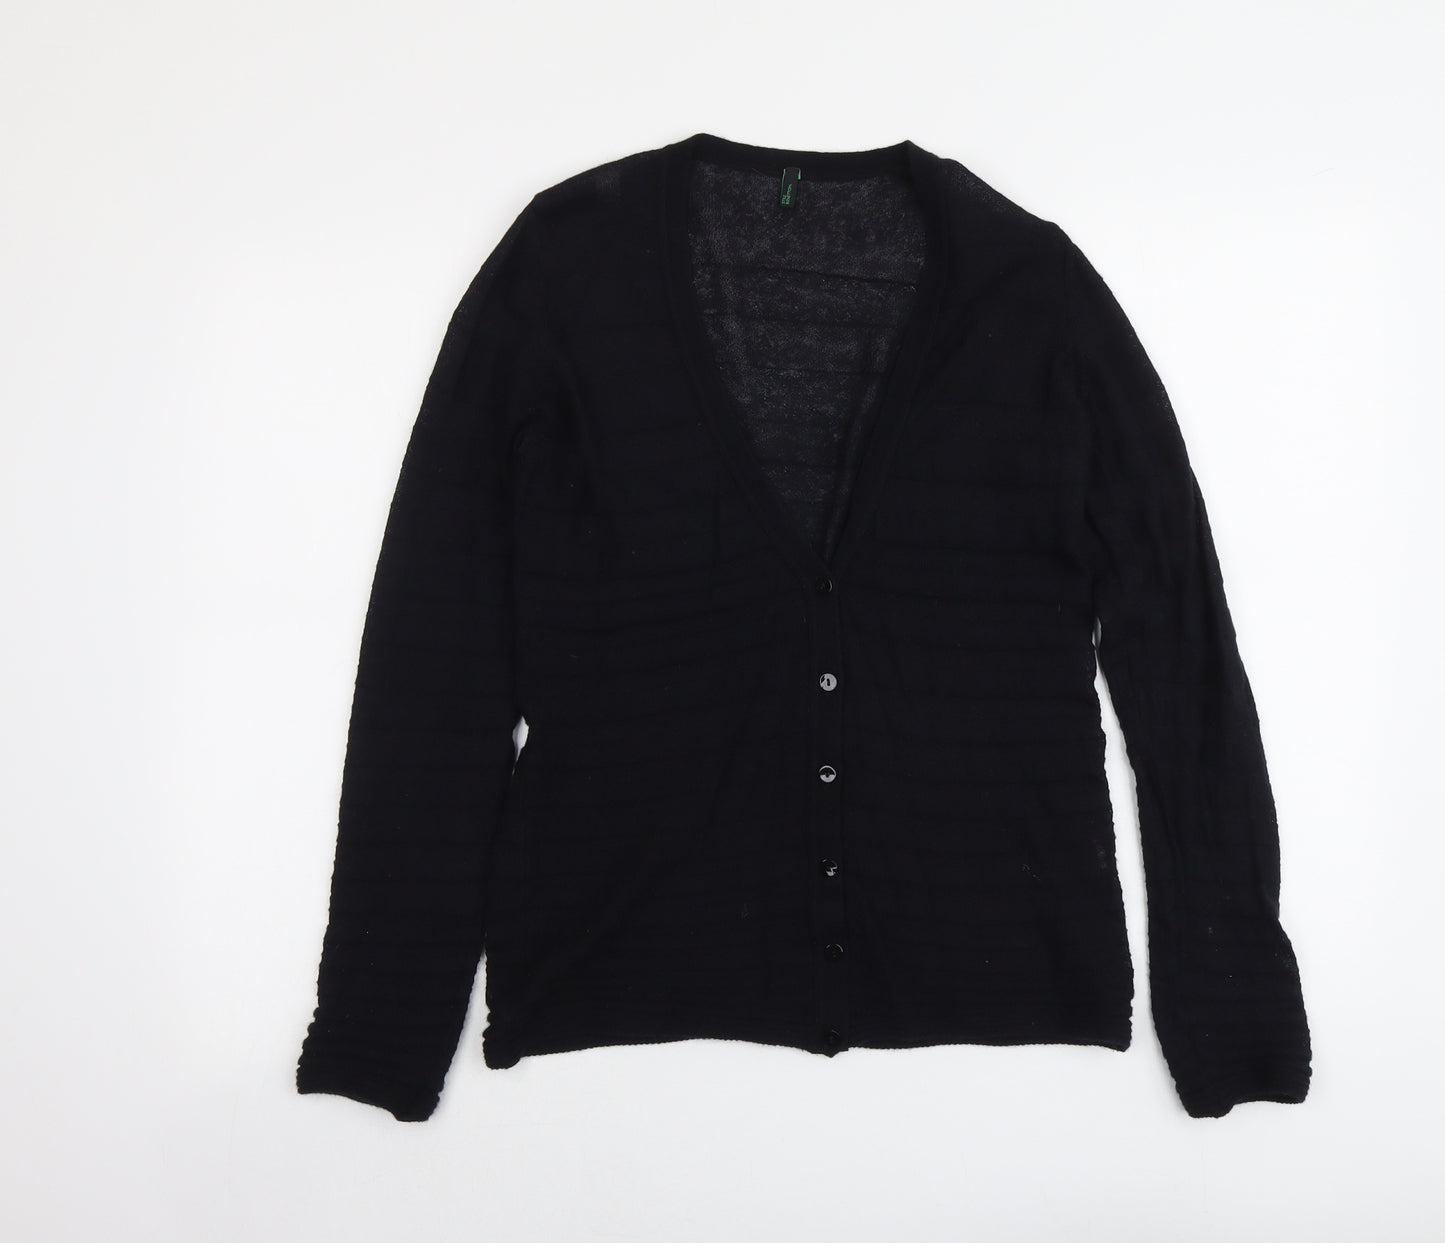 United Colors of Benetton Womens Black V-Neck Acrylic Cardigan Jumper Size S